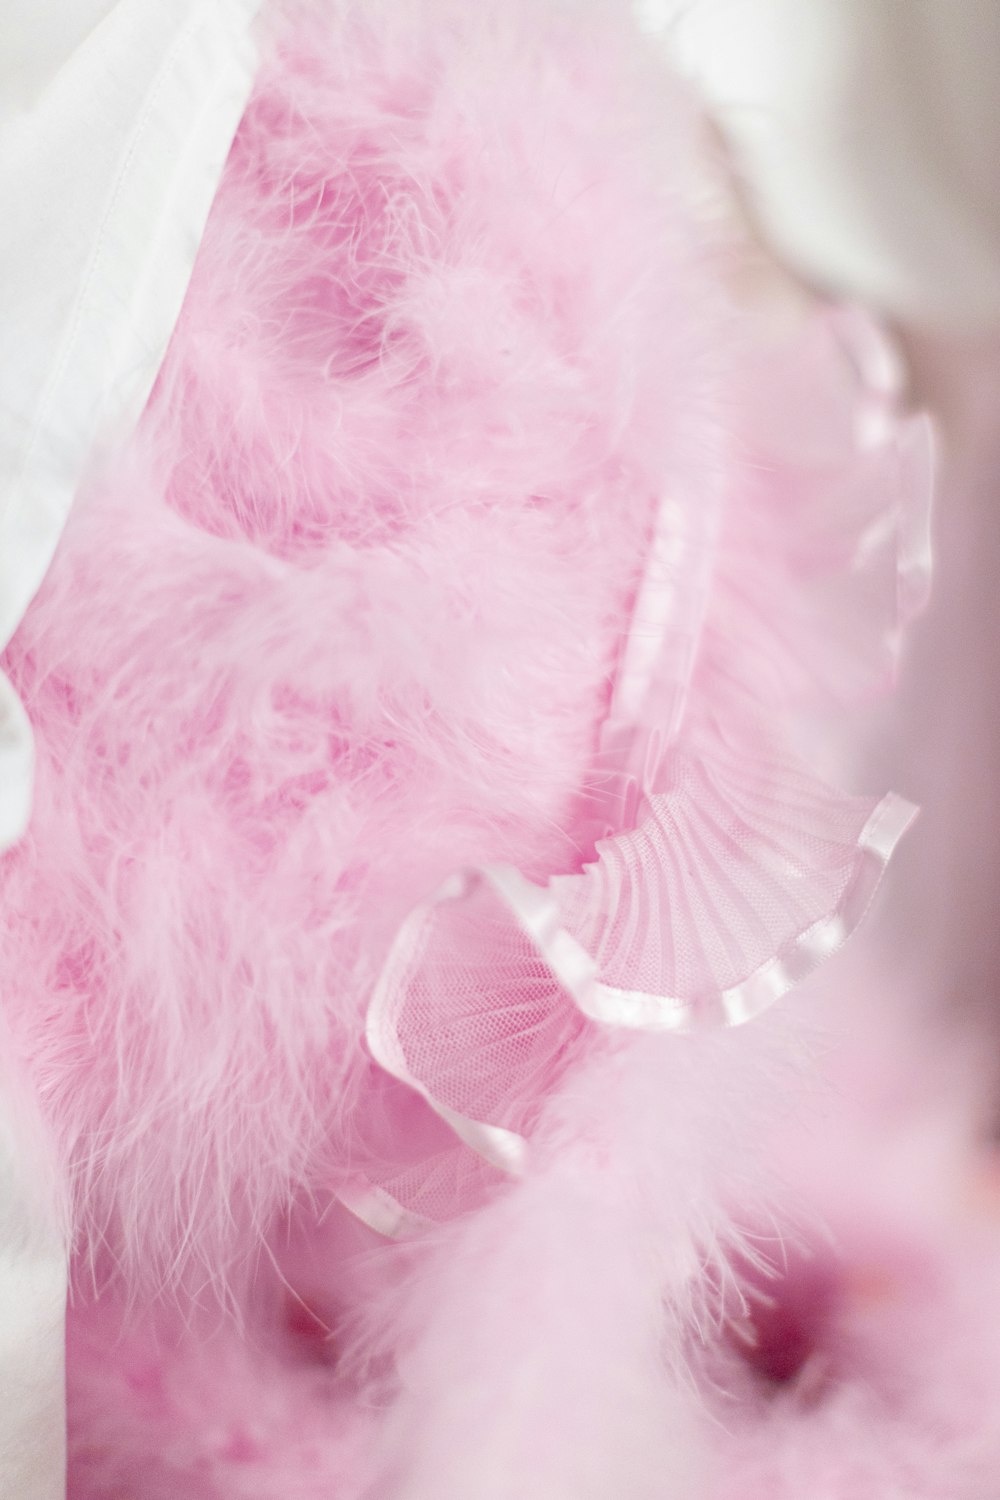 a close up of a pink feather on a white cloth